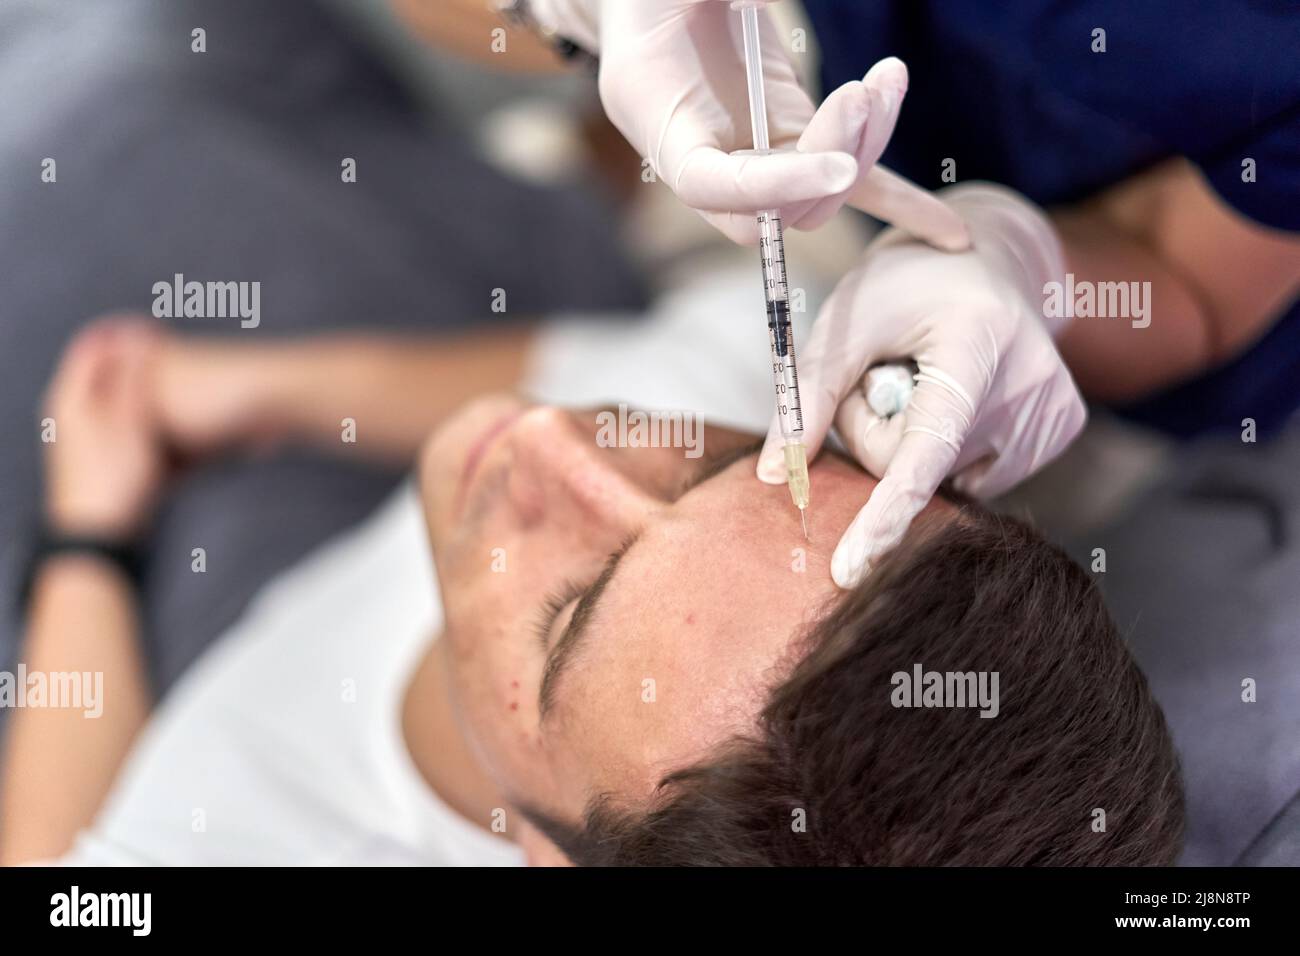 Man receiving a vaccine with collagen to perform a facial beauty treatment Stock Photo